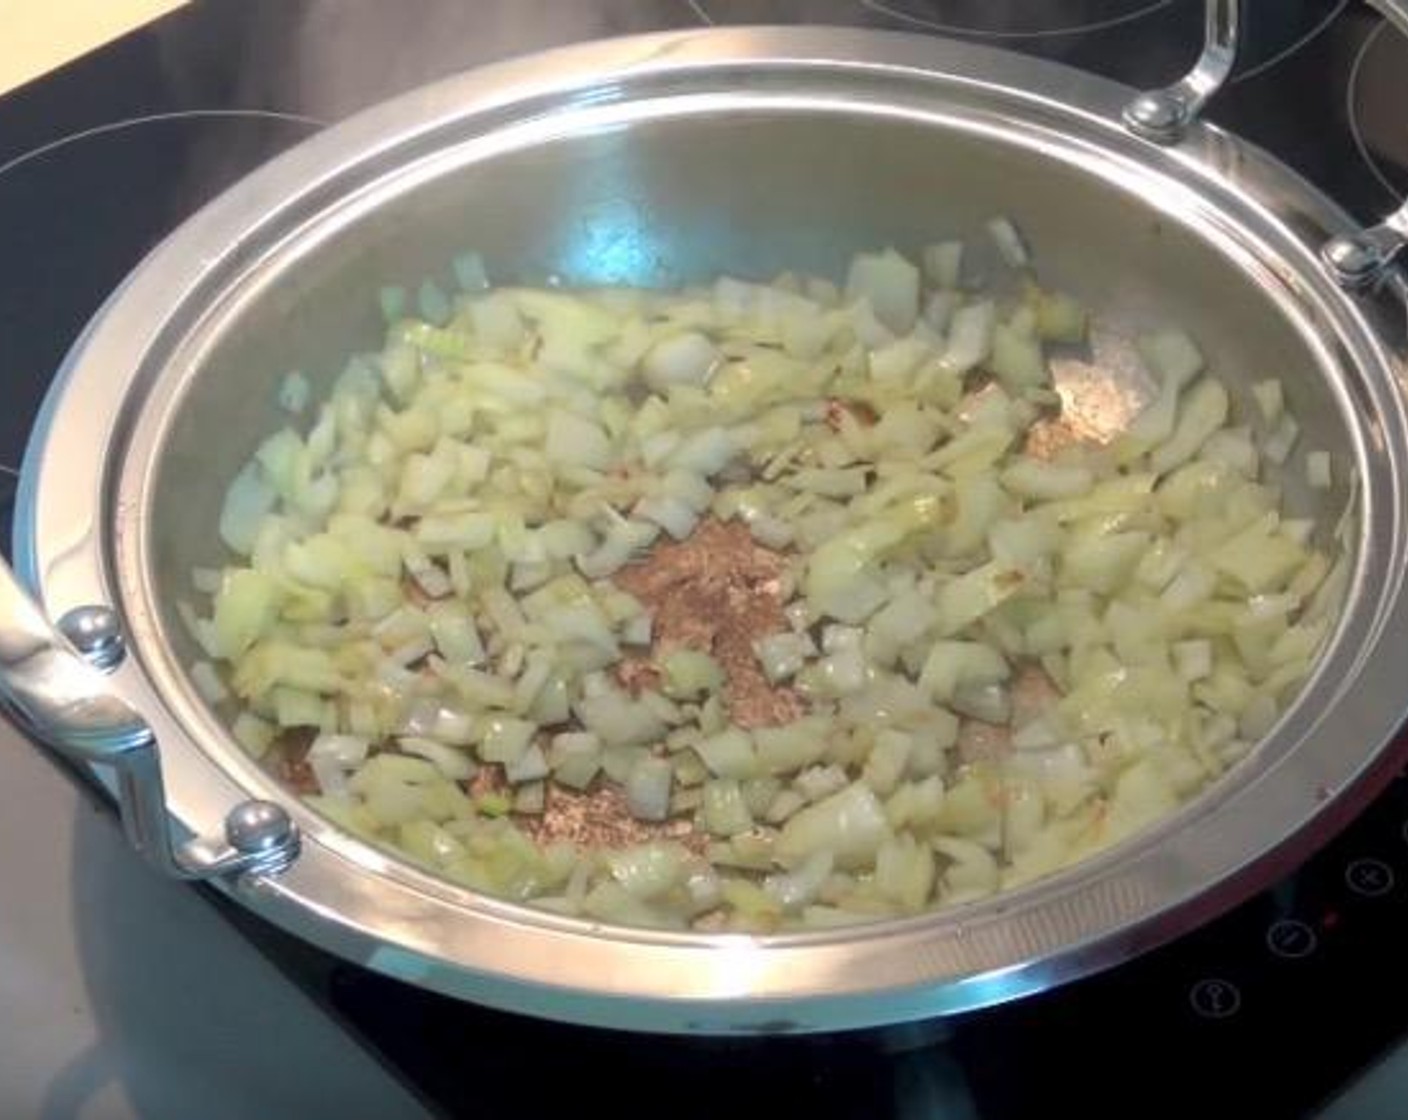 step 2 Into the same pan, add Yellow Onions (2). Cook over a medium heat for 3-4 minutes, or until onions have softened.